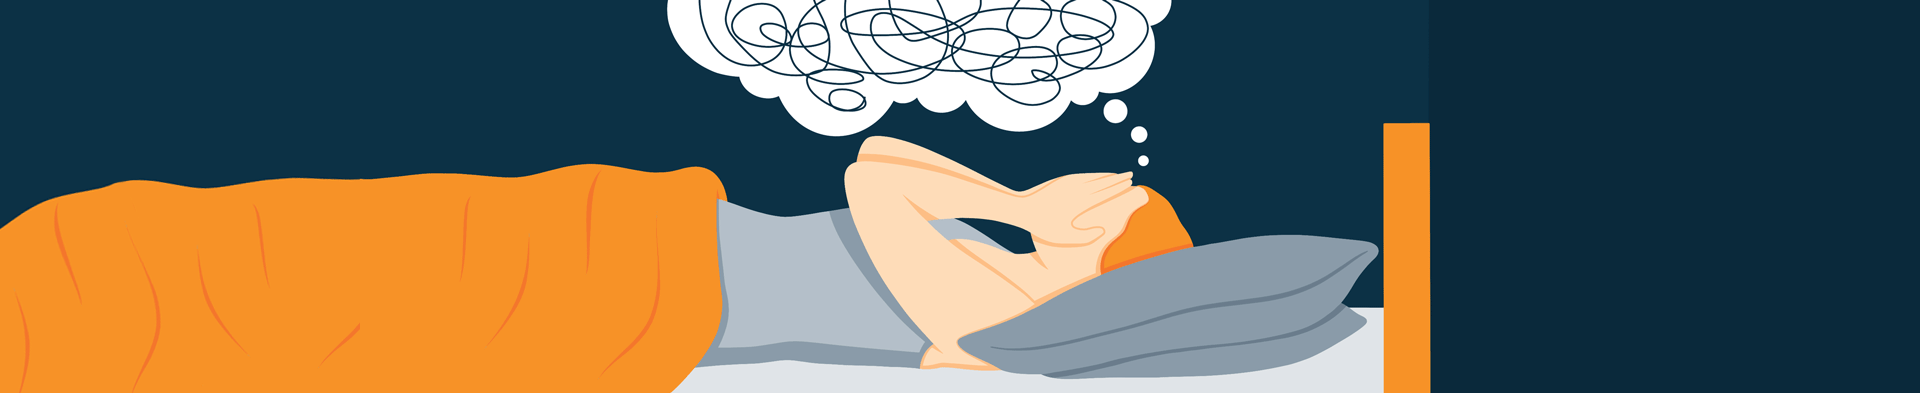 Animated Image of a Woman Having Fear of Going To Sleep Desktop